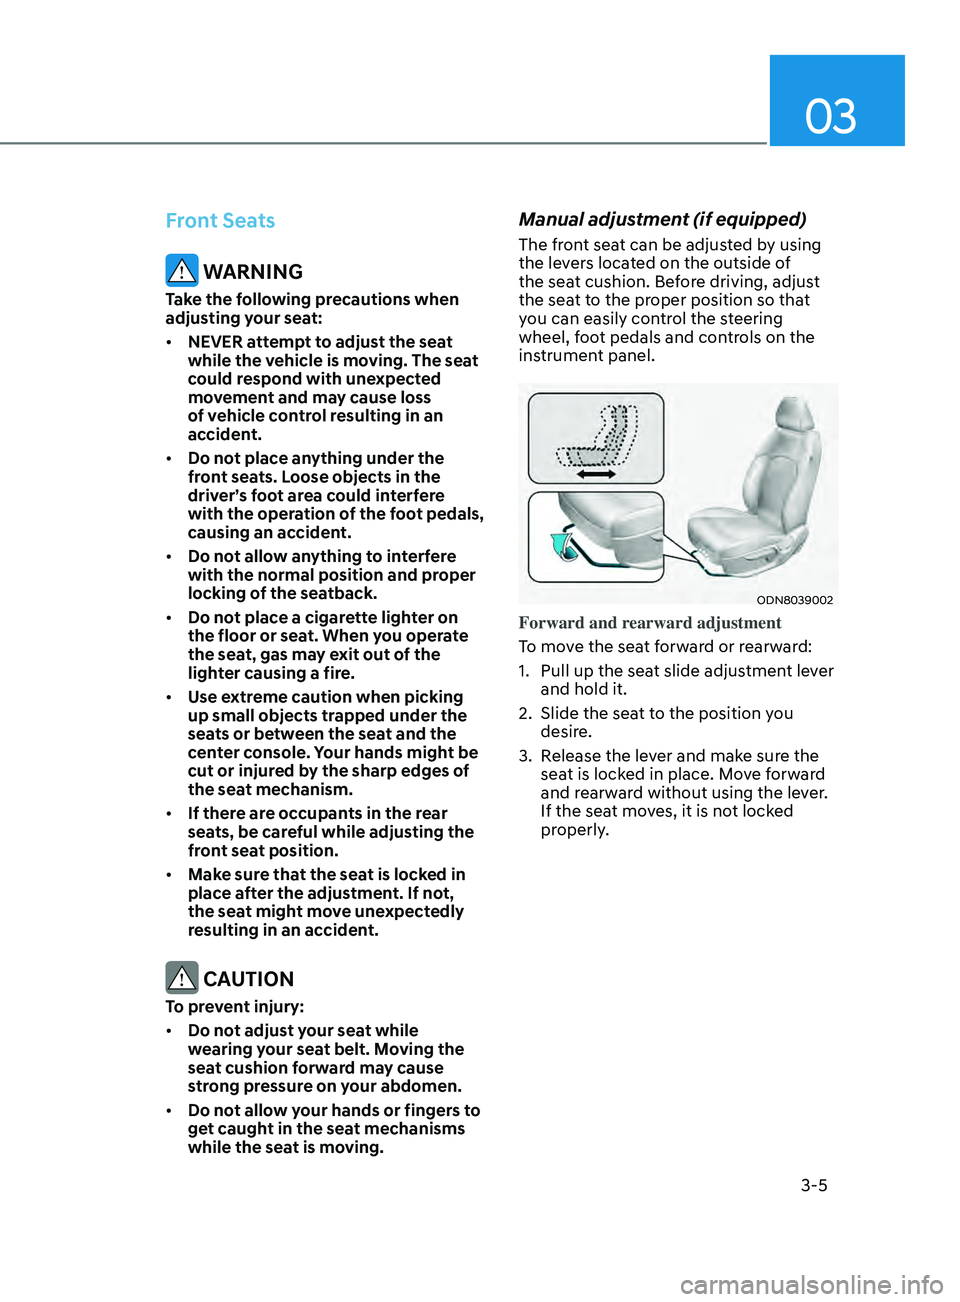 HYUNDAI SONATA 2022  Owners Manual 03
3-5
Front Seats
 WARNING
Take the following precautions when 
adjusting your seat:
•	NEVER attempt to adjust the seat 
while the vehicle is moving. The seat 
could respond with unexpected 
moveme